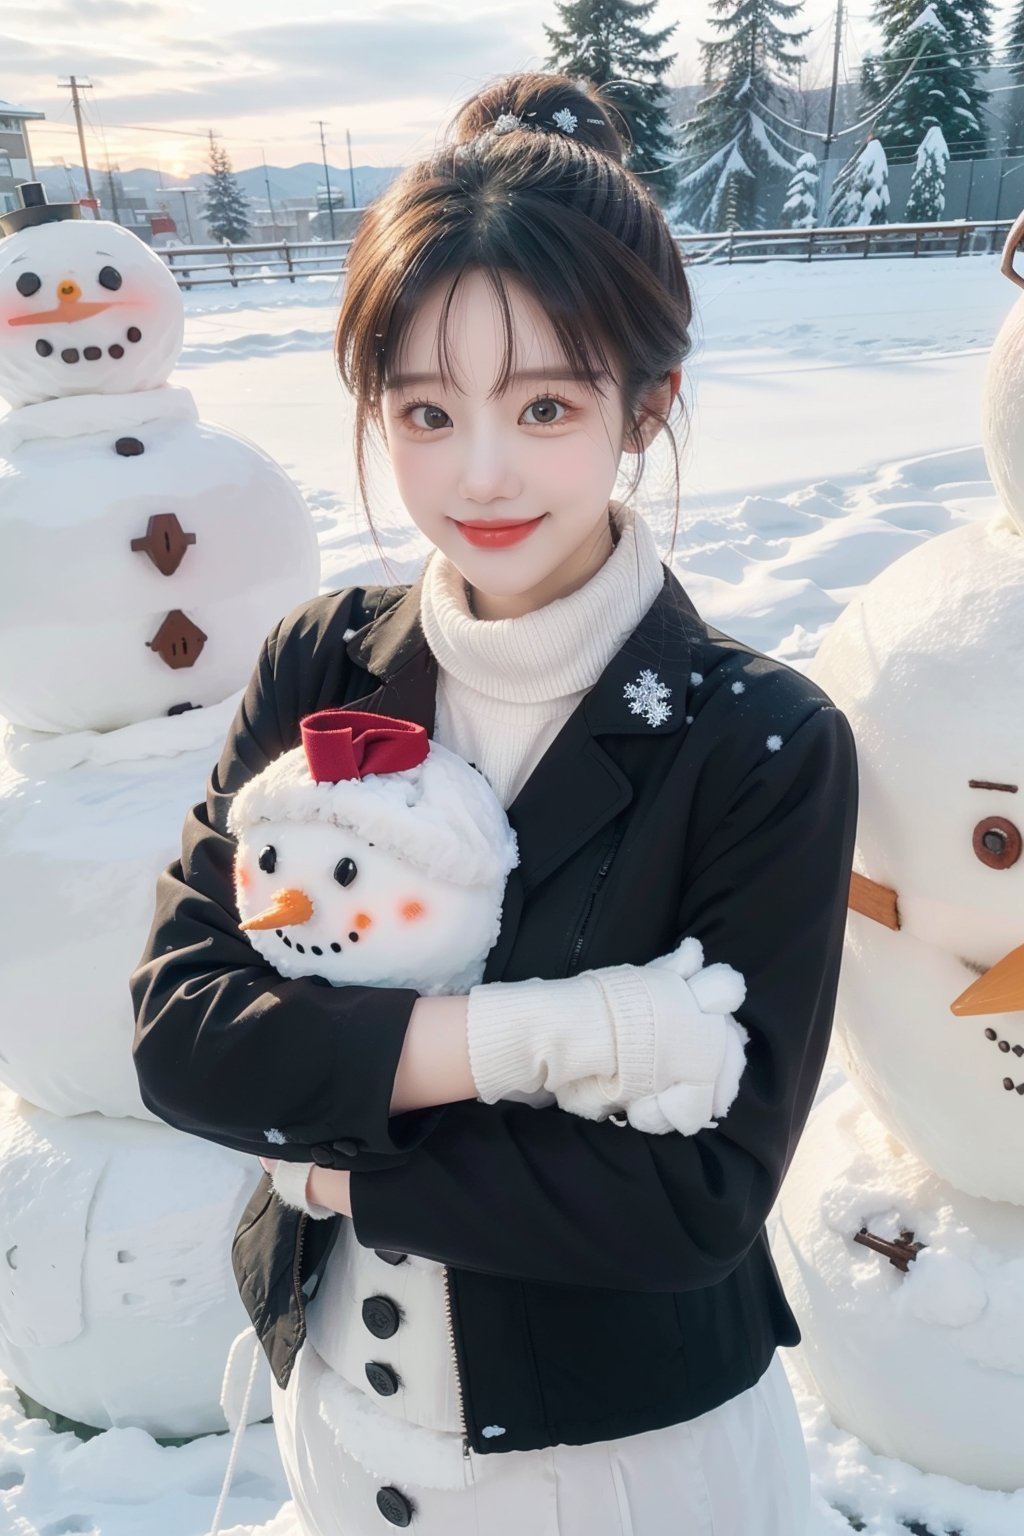 (Best quality, Masterpiece: 1.3), 8K, HD, Detailed face, Perfect beauty: 1. 5, yui yuigahama, short hair, single hair bun, school uniform, black jacket, open jacket, ribbon, collared shirt, plaid skirt,(Smiling), (Very beautiful view), (Most amazing view), (One woman), ( Snow scene), (Plain background), Making snowman, One person, Small chest, Hair in wind Fluttering skirt, Fluffy mitten gloves, earmuffs, scarf, cute snowman, best smile, waving, mini character, three snowmen, jumping snowman, ((hugging snowman)), shovel, penguin,soojin,